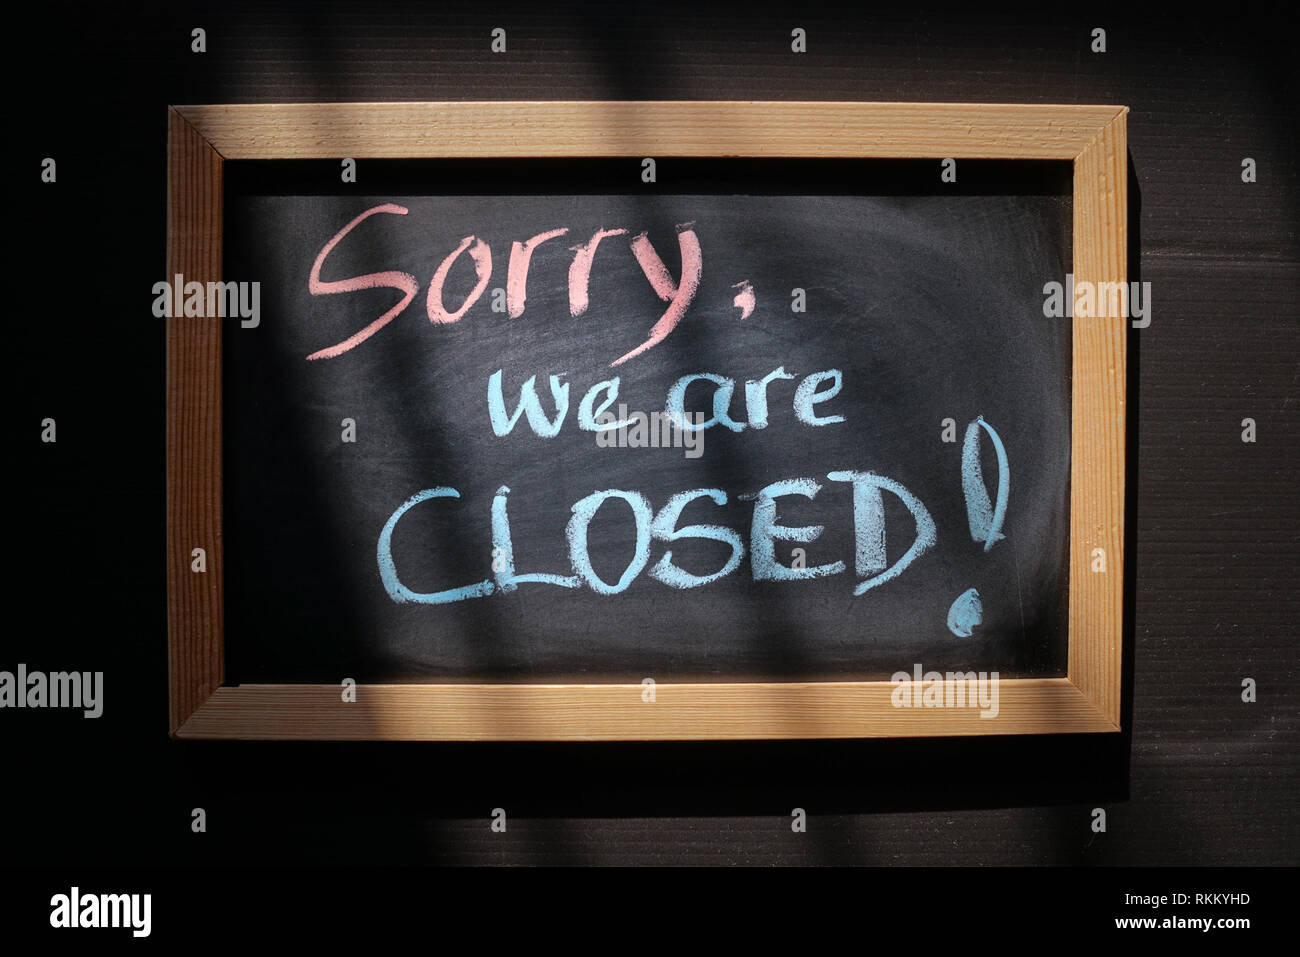 Sorry we are closed written on a board as a notice Stock Photo